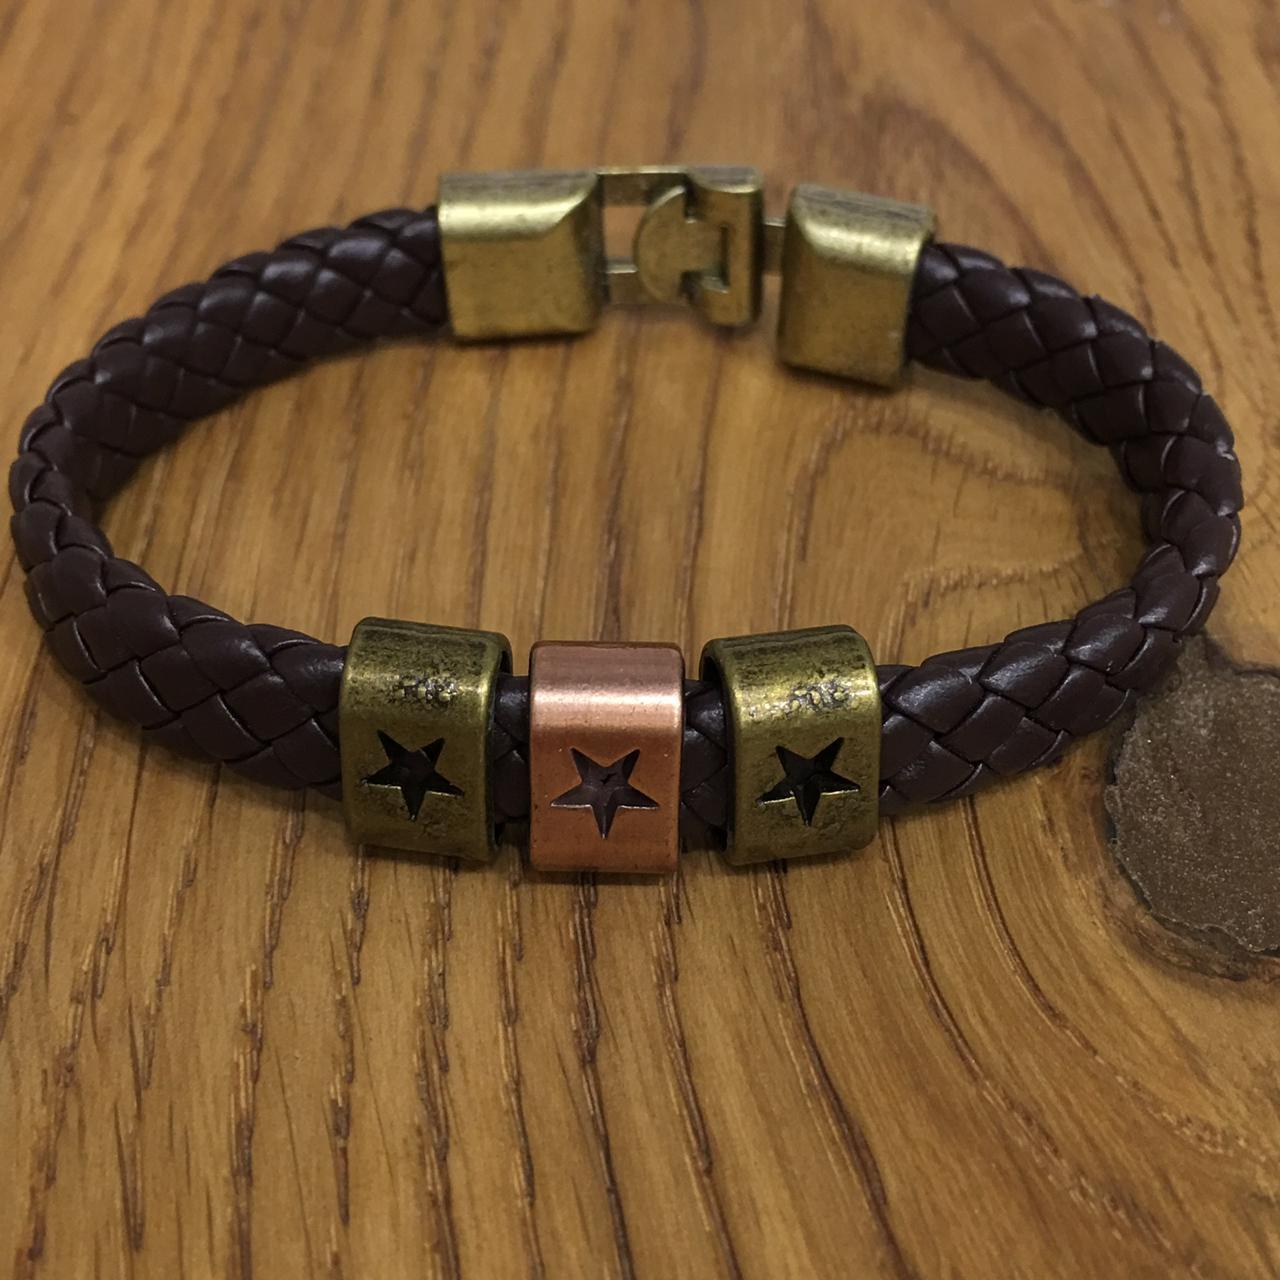 image for Men Bracelets Brown Leather Cowhide Braided Wrap Rose Gold Star Symbol Bracelet Titanium Clasp with Golden Alloy Stainless Steel Magnets Multi Strand Unisex Bangles Wrist Band Men's Jewellery